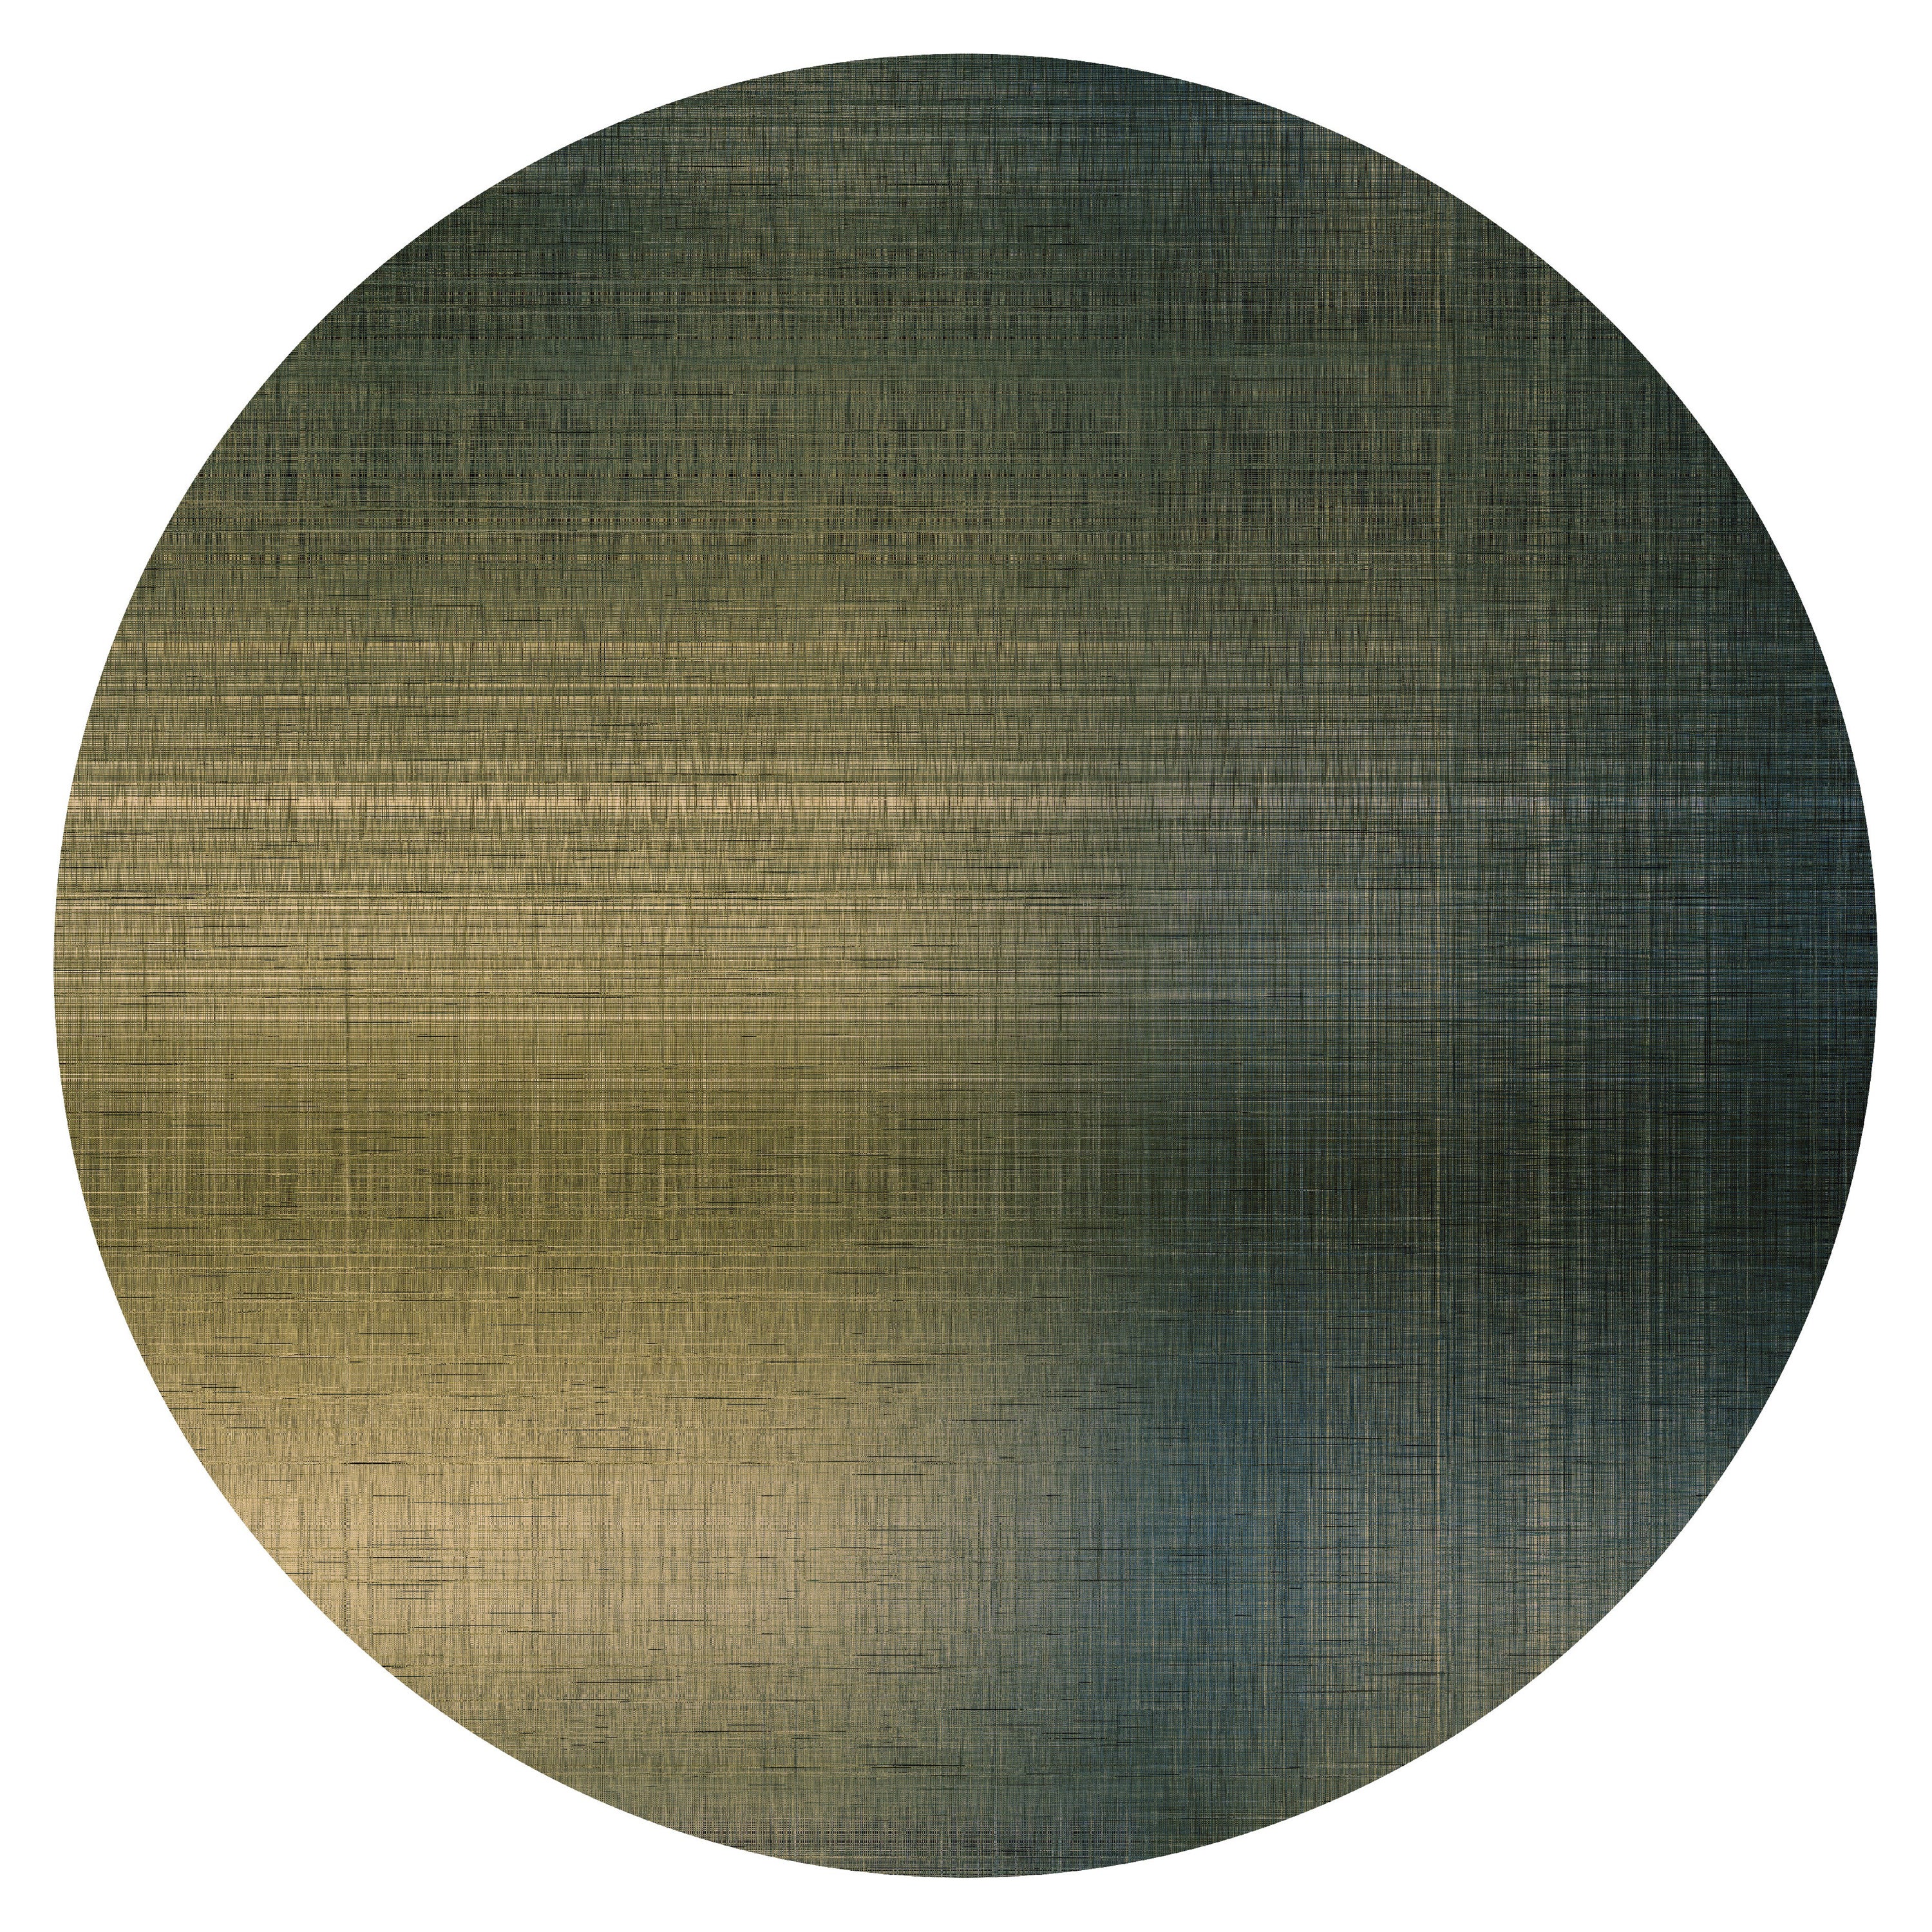 Moooi Small Quiet Canvas Shibori Round Rug in Wool with Blind Hem Finish